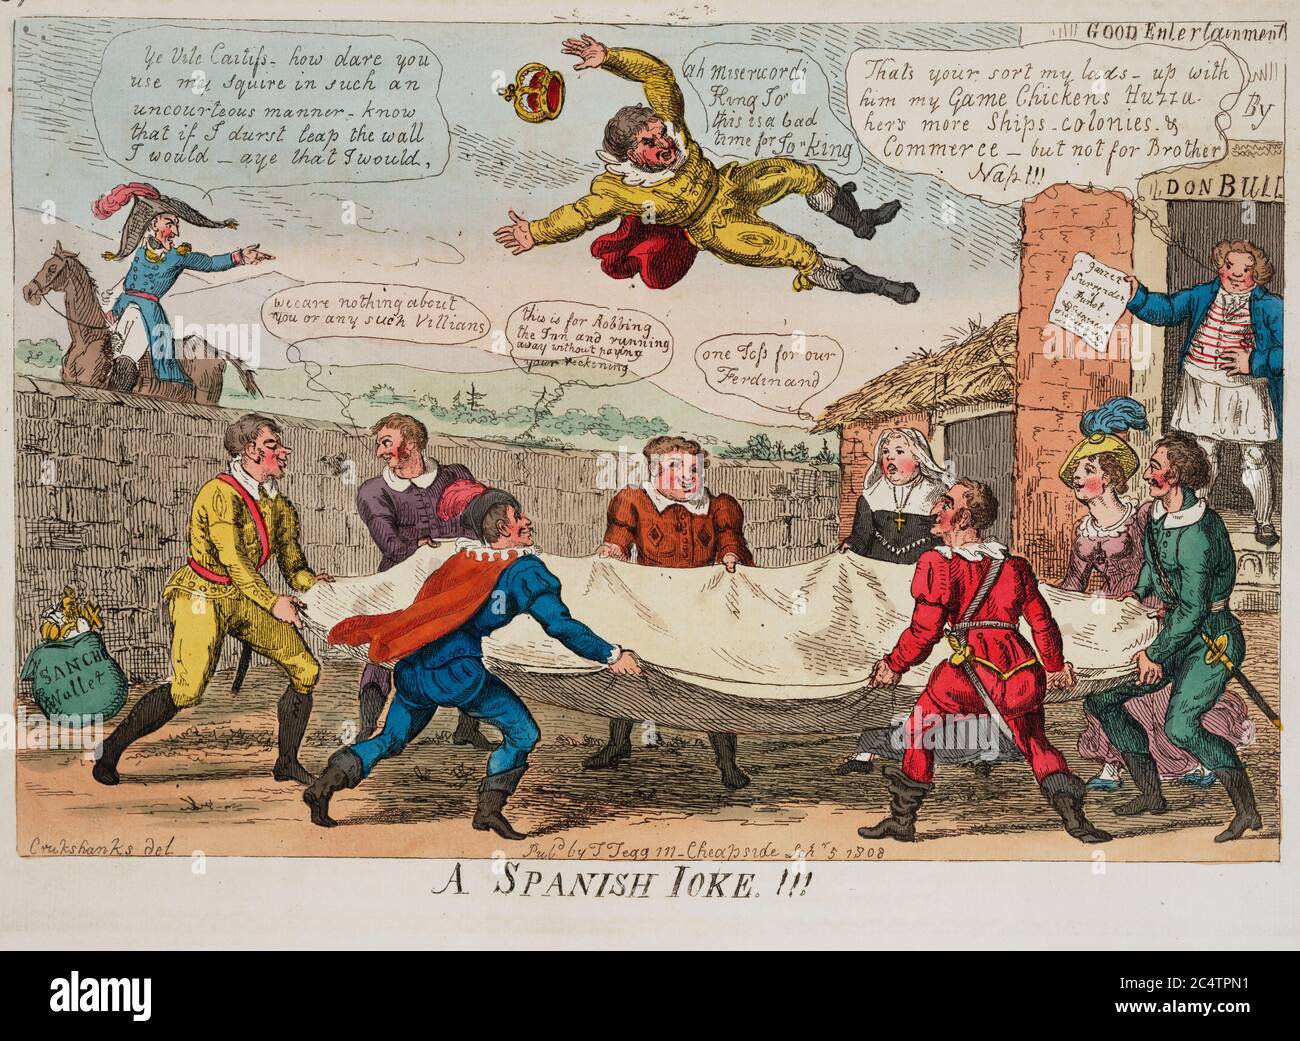 A Spanish joke!!! - Print shows Spanish men and women tossing King Joseph I in the air as a French man complains about his ill treatment. September, 1808 Stock Photo